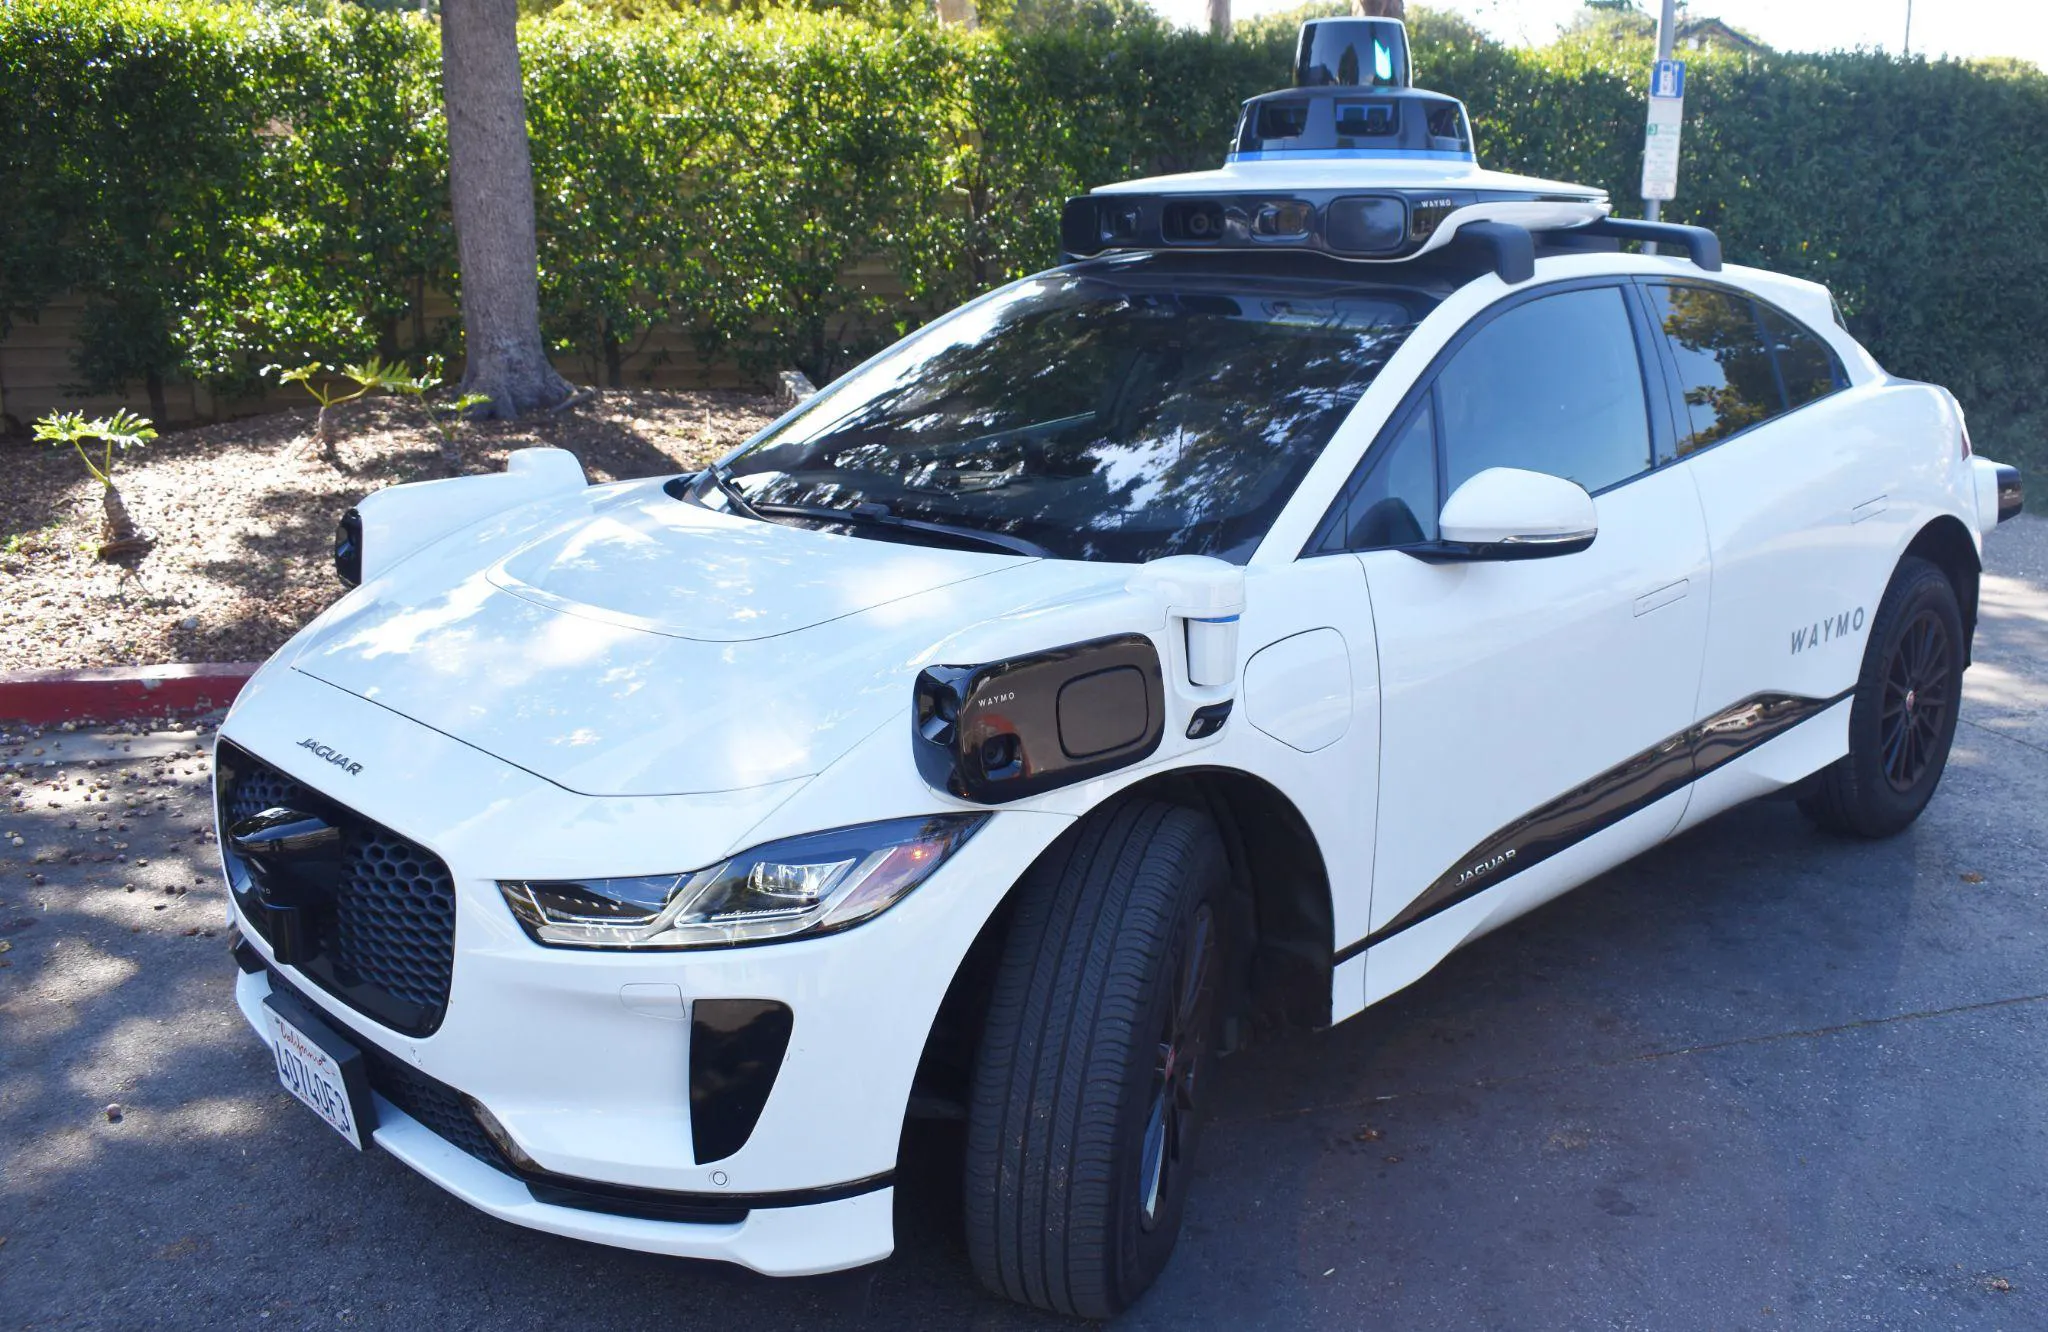 Waymo Takes Testing to the Next Level: No Human Even in the Driver’s Seat